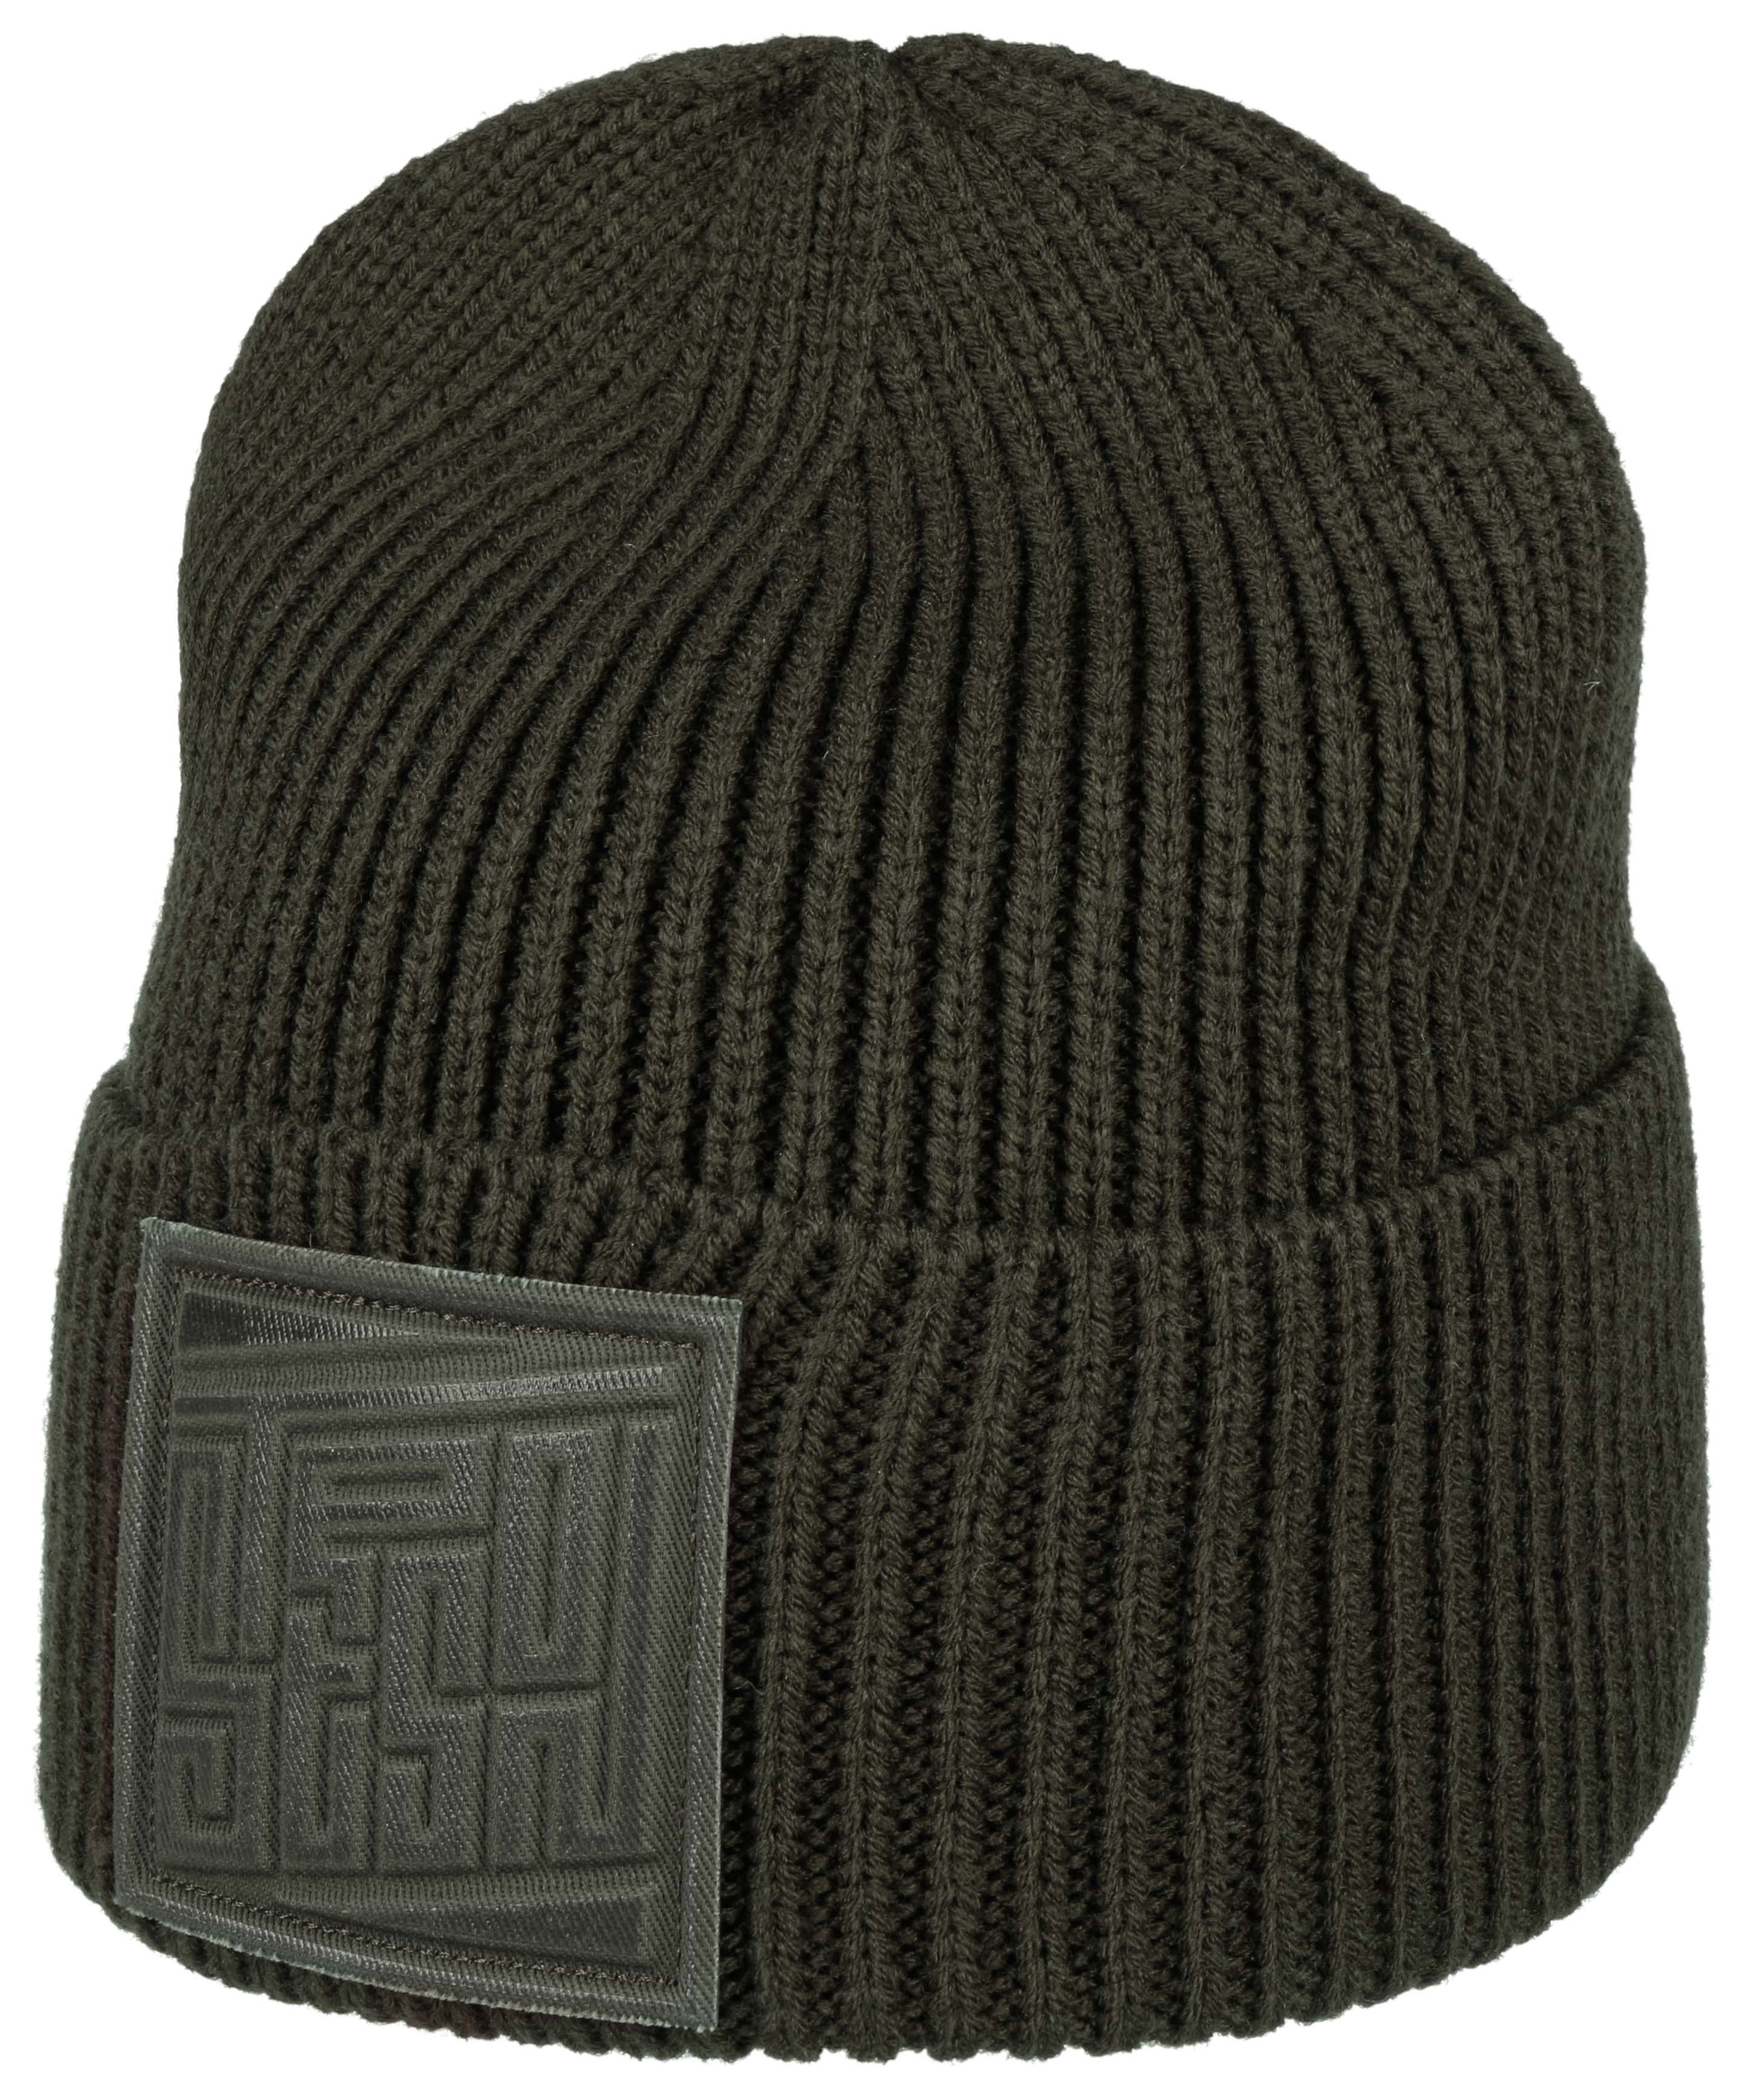 Beanie Embossed Badge Olive One Size